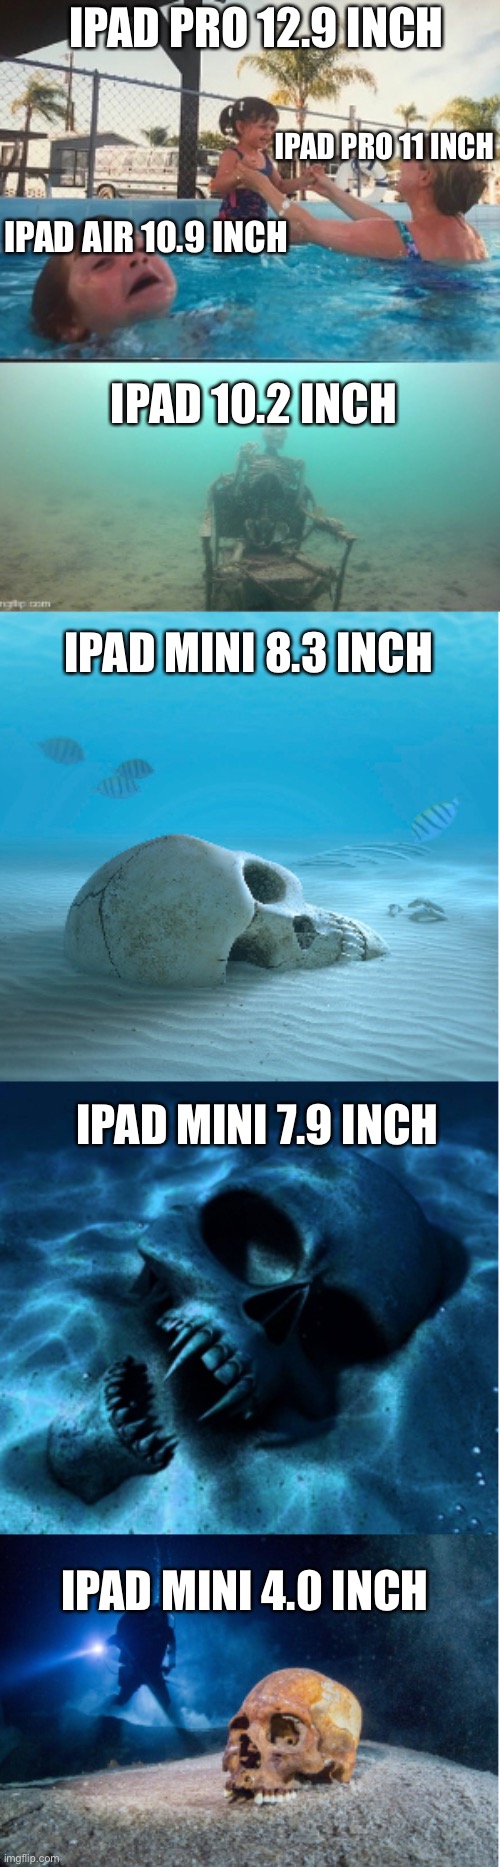 Ipad sizes | IPAD PRO 12.9 INCH; IPAD PRO 11 INCH; IPAD AIR 10.9 INCH; IPAD 10.2 INCH; IPAD MINI 8.3 INCH; IPAD MINI 7.9 INCH; IPAD MINI 4.0 INCH | image tagged in drowning kid forgotten skeletons | made w/ Imgflip meme maker